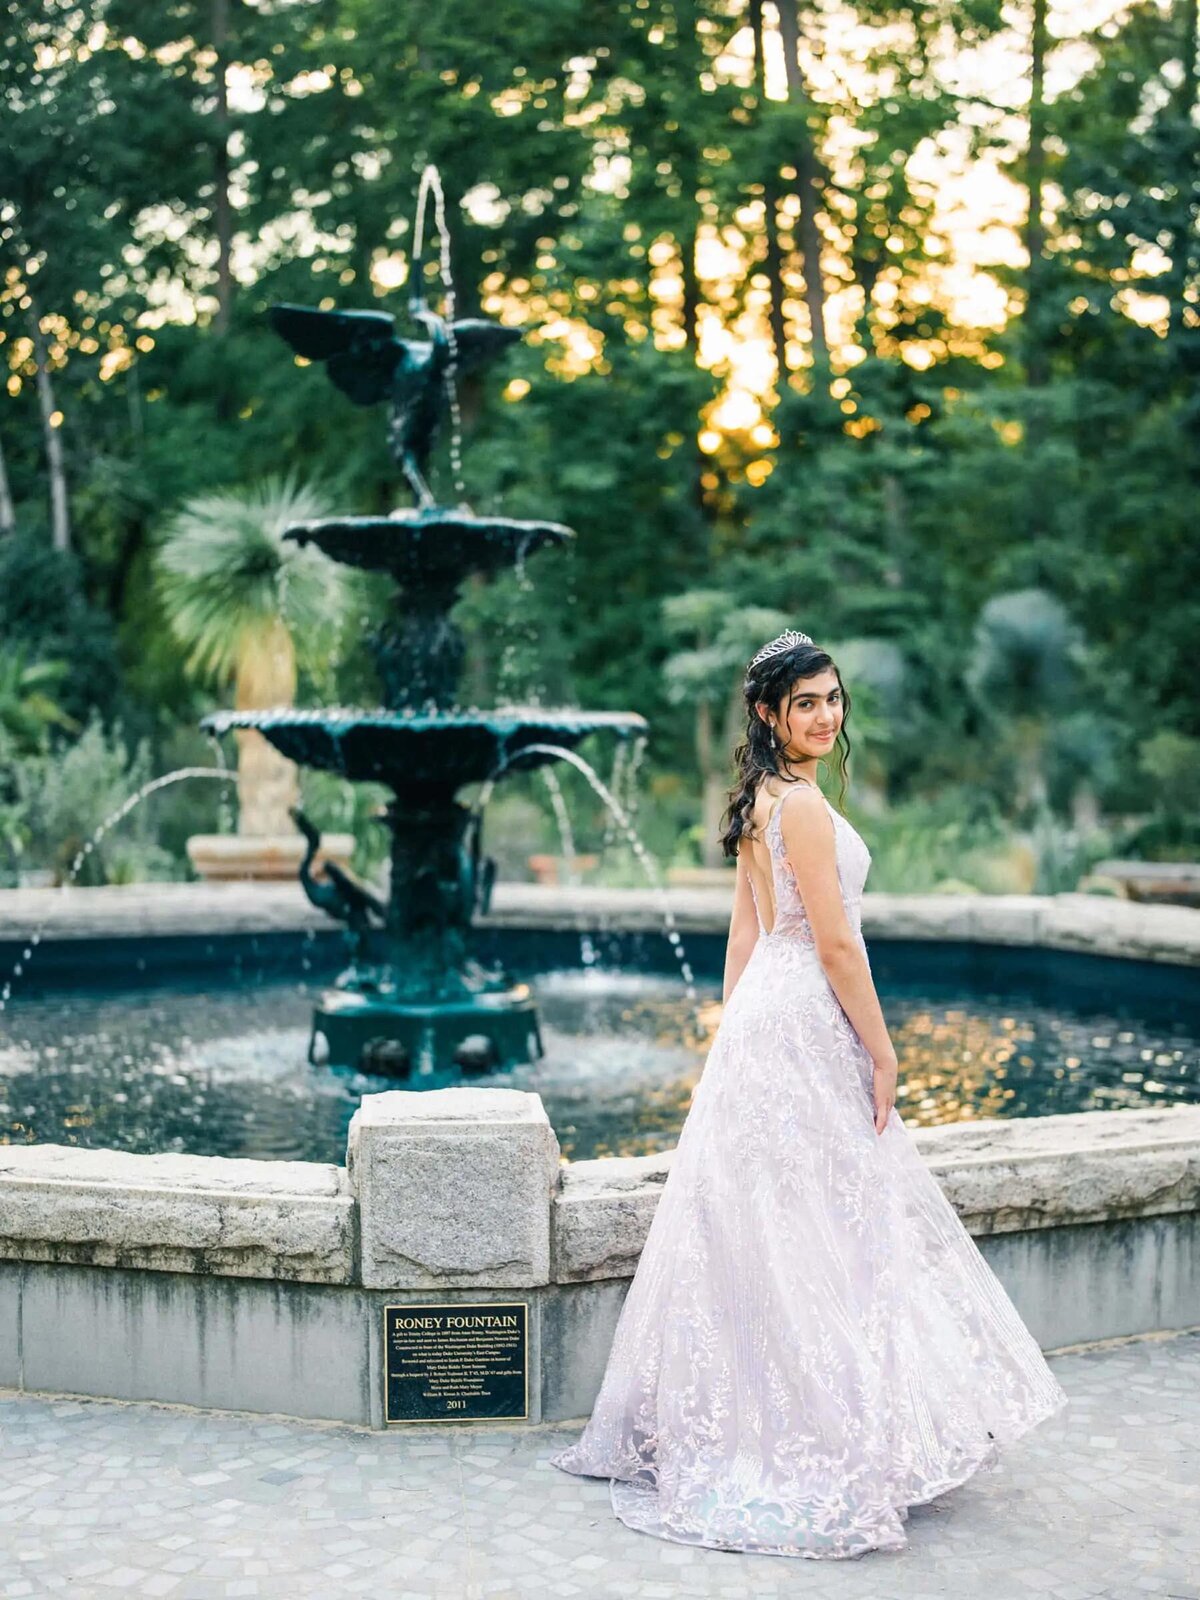 A girl in a gown standing in front of a fountain outside.